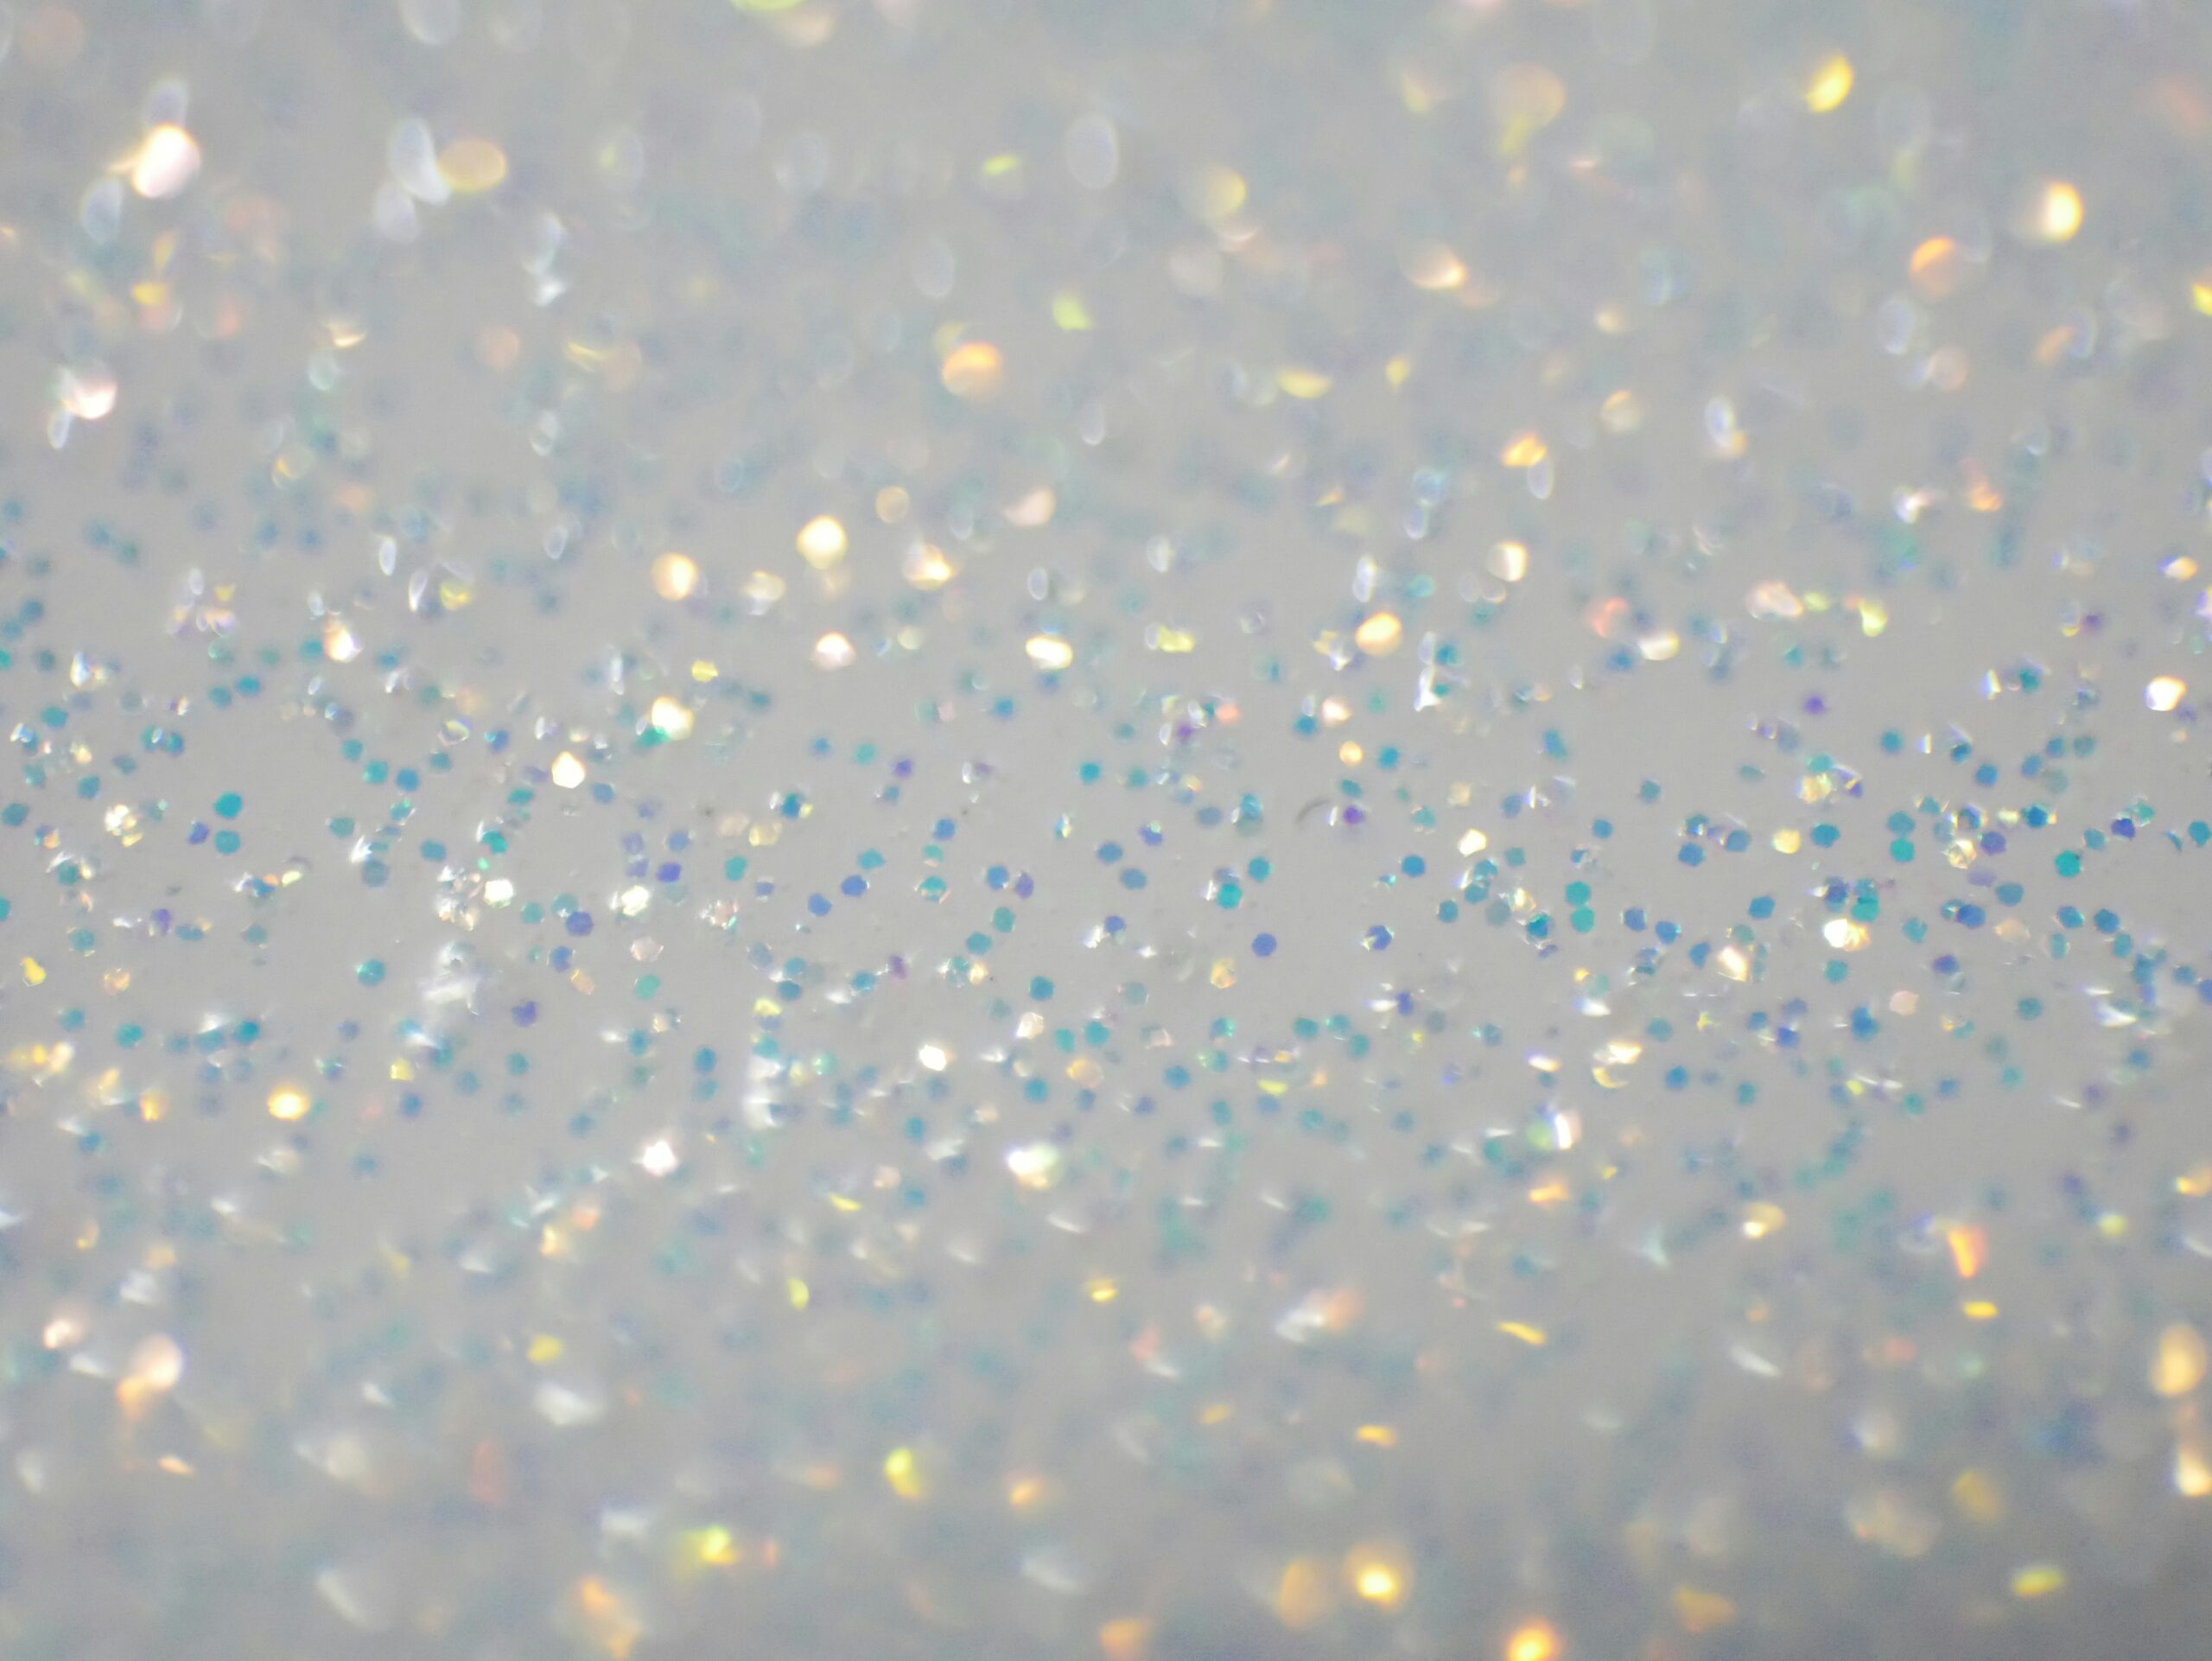 Close-up of a glittering surface with scattered blue and silver sparkles.